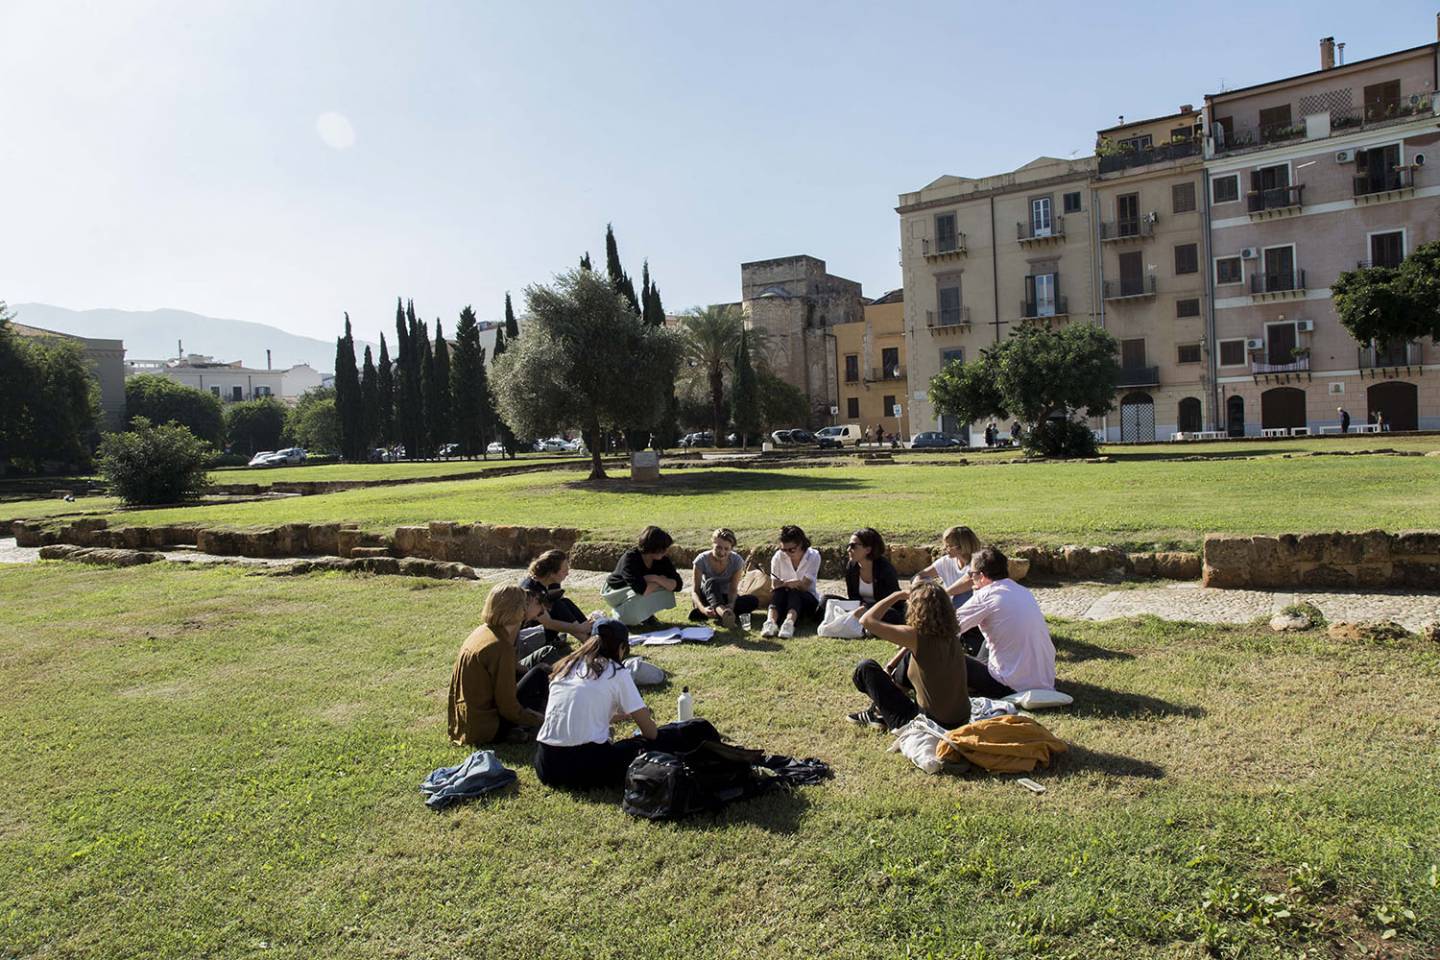 People sitting on the grass in a circle.